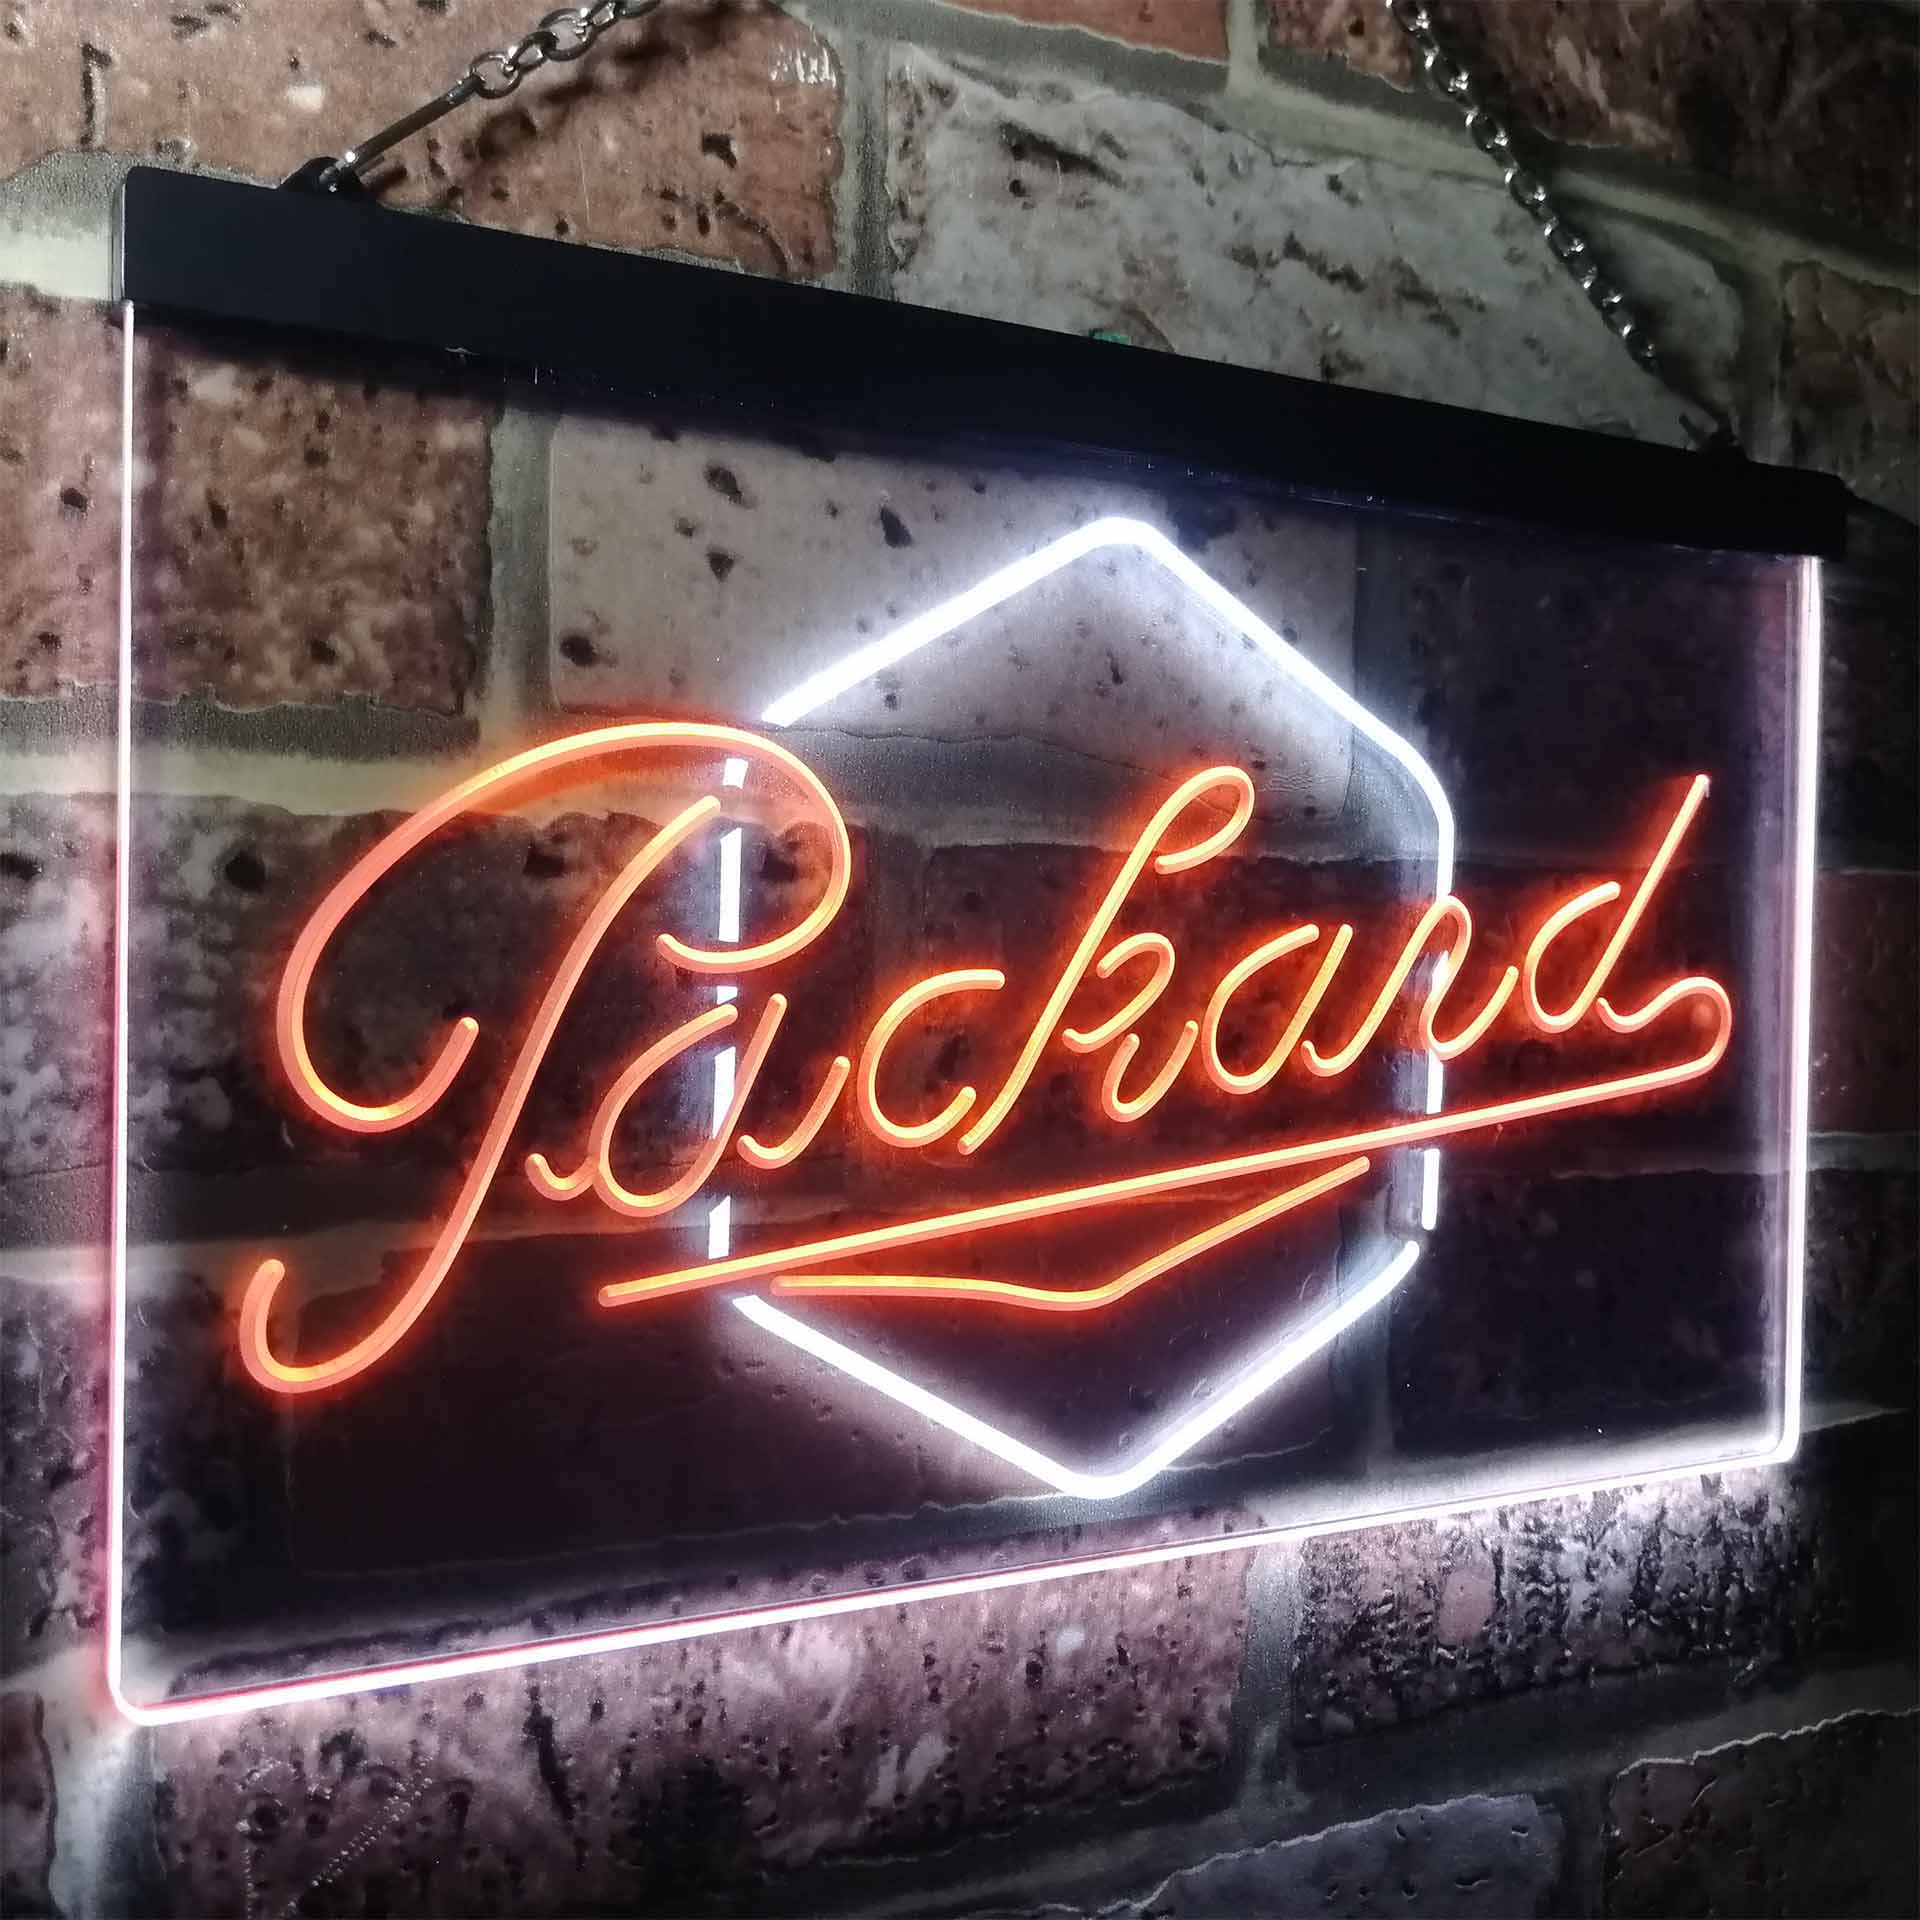 Packard Auto LED Neon Sign